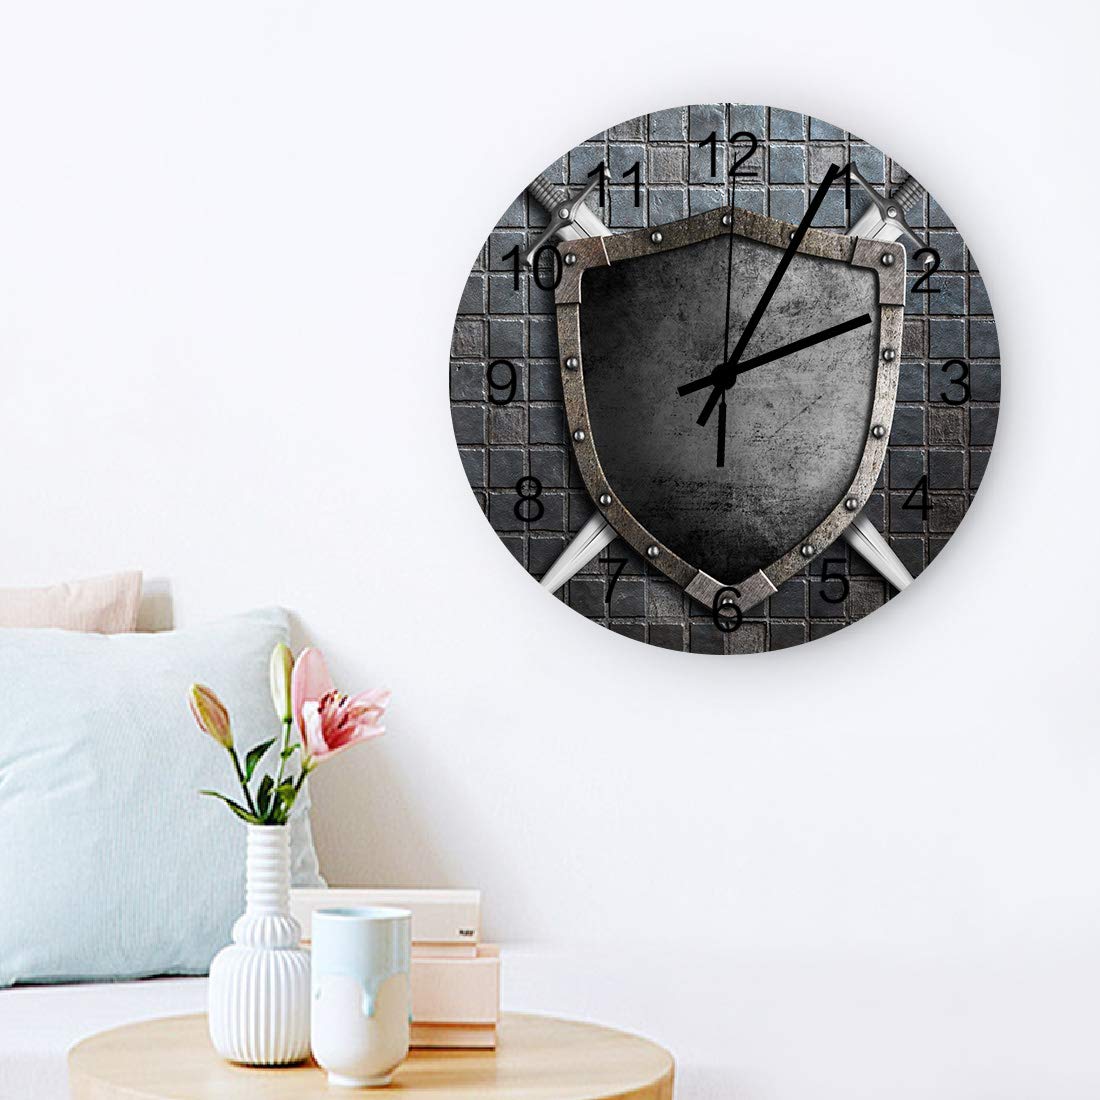 12 Inch Silent Round Wooden Wall Clock Medieval Knight Shield Wall Clock, Non Ticking Battery Operated Quartz Home Decor Wall Clocks for Living Room/Kitchen/Office